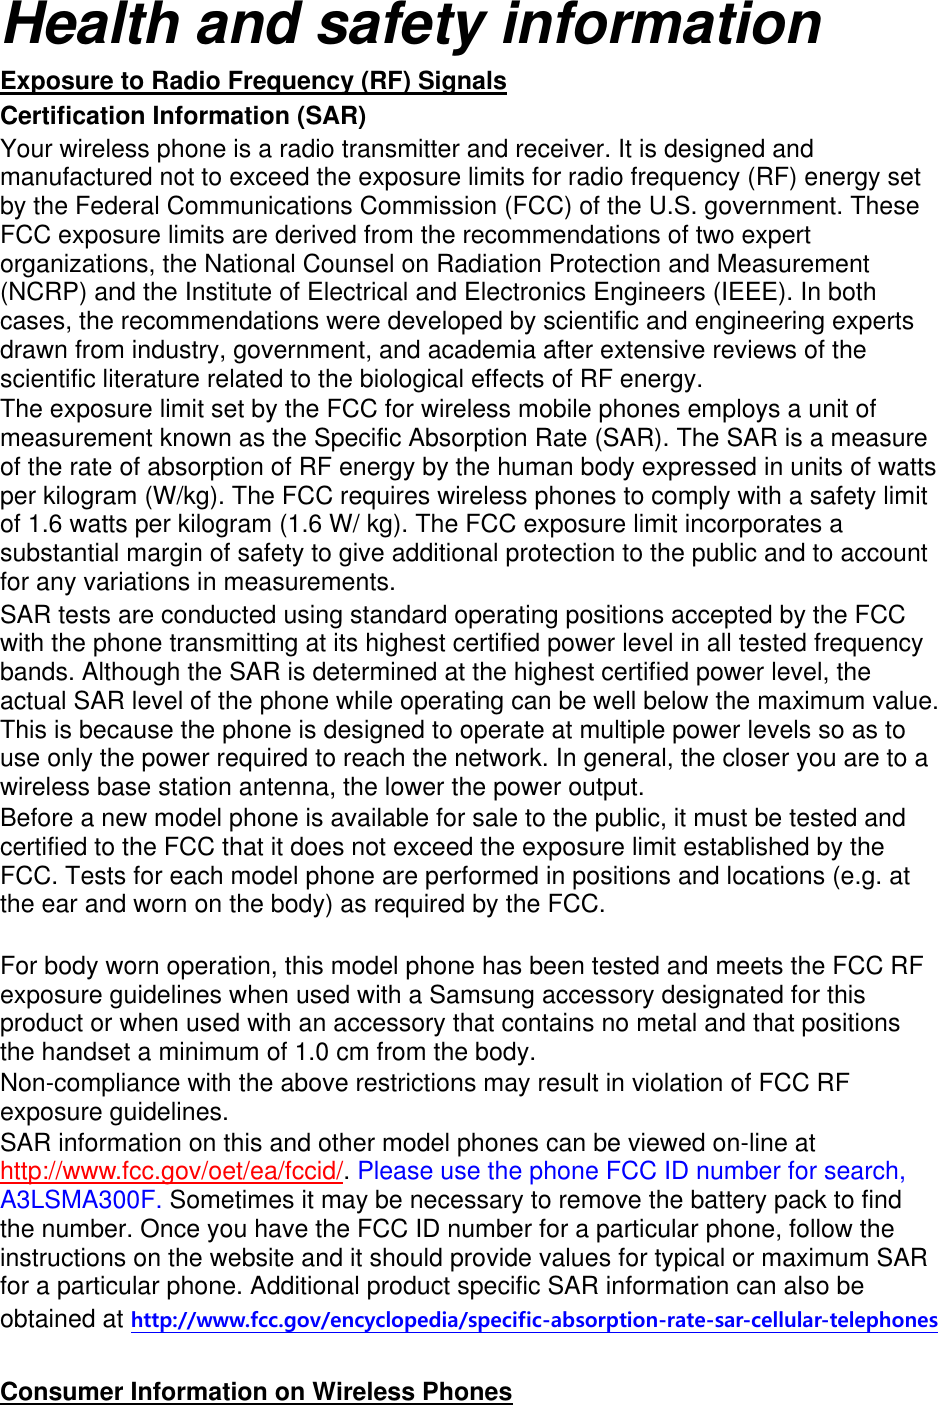 Health and safety information Exposure to Radio Frequency (RF) Signals Certification Information (SAR) Your wireless phone is a radio transmitter and receiver. It is designed and manufactured not to exceed the exposure limits for radio frequency (RF) energy set by the Federal Communications Commission (FCC) of the U.S. government. These FCC exposure limits are derived from the recommendations of two expert organizations, the National Counsel on Radiation Protection and Measurement (NCRP) and the Institute of Electrical and Electronics Engineers (IEEE). In both cases, the recommendations were developed by scientific and engineering experts drawn from industry, government, and academia after extensive reviews of the scientific literature related to the biological effects of RF energy. The exposure limit set by the FCC for wireless mobile phones employs a unit of measurement known as the Specific Absorption Rate (SAR). The SAR is a measure of the rate of absorption of RF energy by the human body expressed in units of watts per kilogram (W/kg). The FCC requires wireless phones to comply with a safety limit of 1.6 watts per kilogram (1.6 W/ kg). The FCC exposure limit incorporates a substantial margin of safety to give additional protection to the public and to account for any variations in measurements. SAR tests are conducted using standard operating positions accepted by the FCC with the phone transmitting at its highest certified power level in all tested frequency bands. Although the SAR is determined at the highest certified power level, the actual SAR level of the phone while operating can be well below the maximum value. This is because the phone is designed to operate at multiple power levels so as to use only the power required to reach the network. In general, the closer you are to a wireless base station antenna, the lower the power output. Before a new model phone is available for sale to the public, it must be tested and certified to the FCC that it does not exceed the exposure limit established by the FCC. Tests for each model phone are performed in positions and locations (e.g. at the ear and worn on the body) as required by the FCC.      For body worn operation, this model phone has been tested and meets the FCC RF exposure guidelines when used with a Samsung accessory designated for this product or when used with an accessory that contains no metal and that positions the handset a minimum of 1.0 cm from the body.   Non-compliance with the above restrictions may result in violation of FCC RF exposure guidelines. SAR information on this and other model phones can be viewed on-line at http://www.fcc.gov/oet/ea/fccid/. Please use the phone FCC ID number for search, A3LSMA300F. Sometimes it may be necessary to remove the battery pack to find the number. Once you have the FCC ID number for a particular phone, follow the instructions on the website and it should provide values for typical or maximum SAR for a particular phone. Additional product specific SAR information can also be obtained at http://www.fcc.gov/encyclopedia/specific-absorption-rate-sar-cellular-telephones  Consumer Information on Wireless Phones 